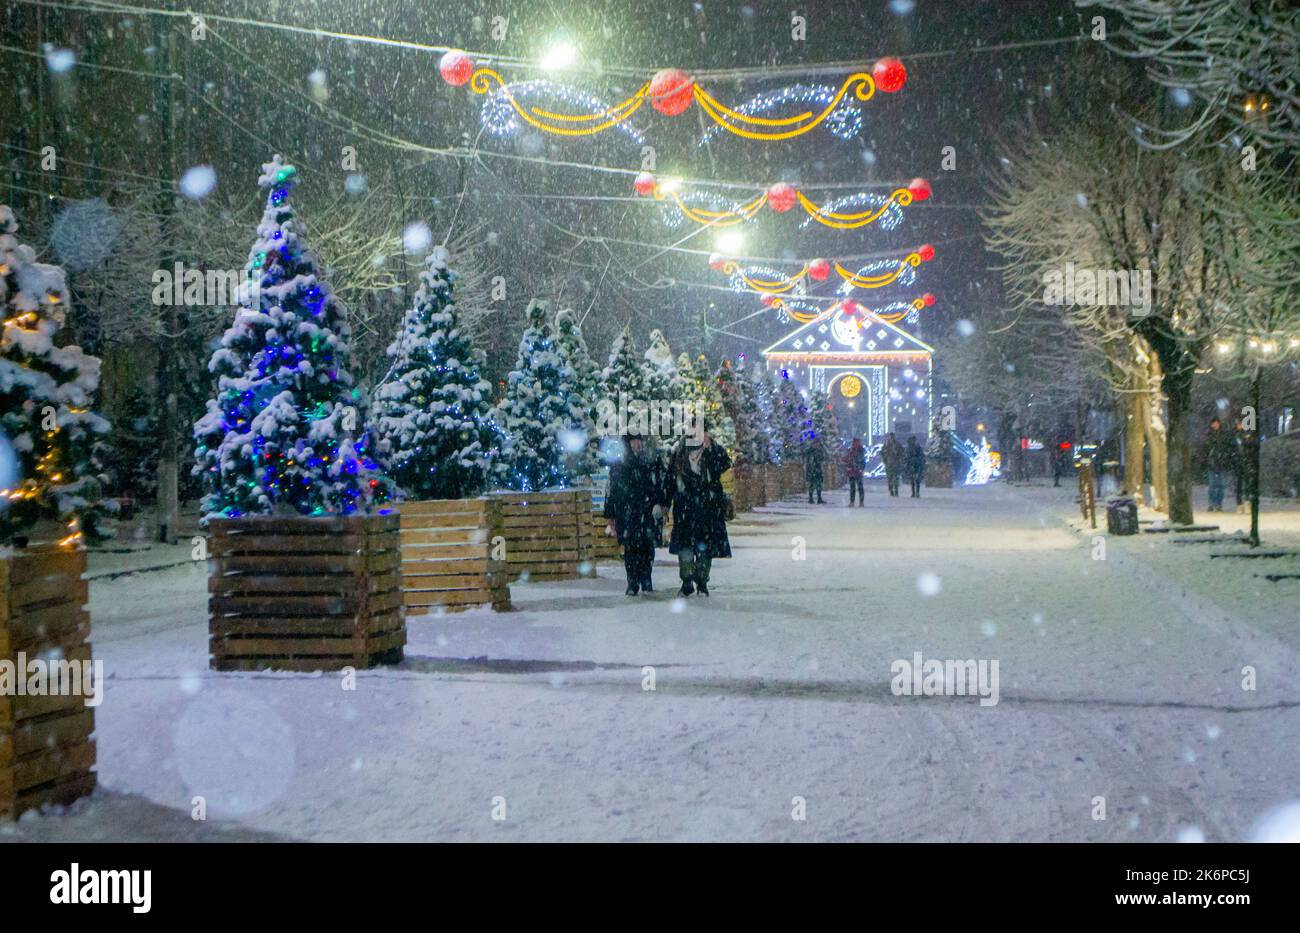 Snowy city street with Christmas trees and illumination decoration during snowfall on winter night. People walking down street. Abstract Christmas New Year and winter background. Stock Photo